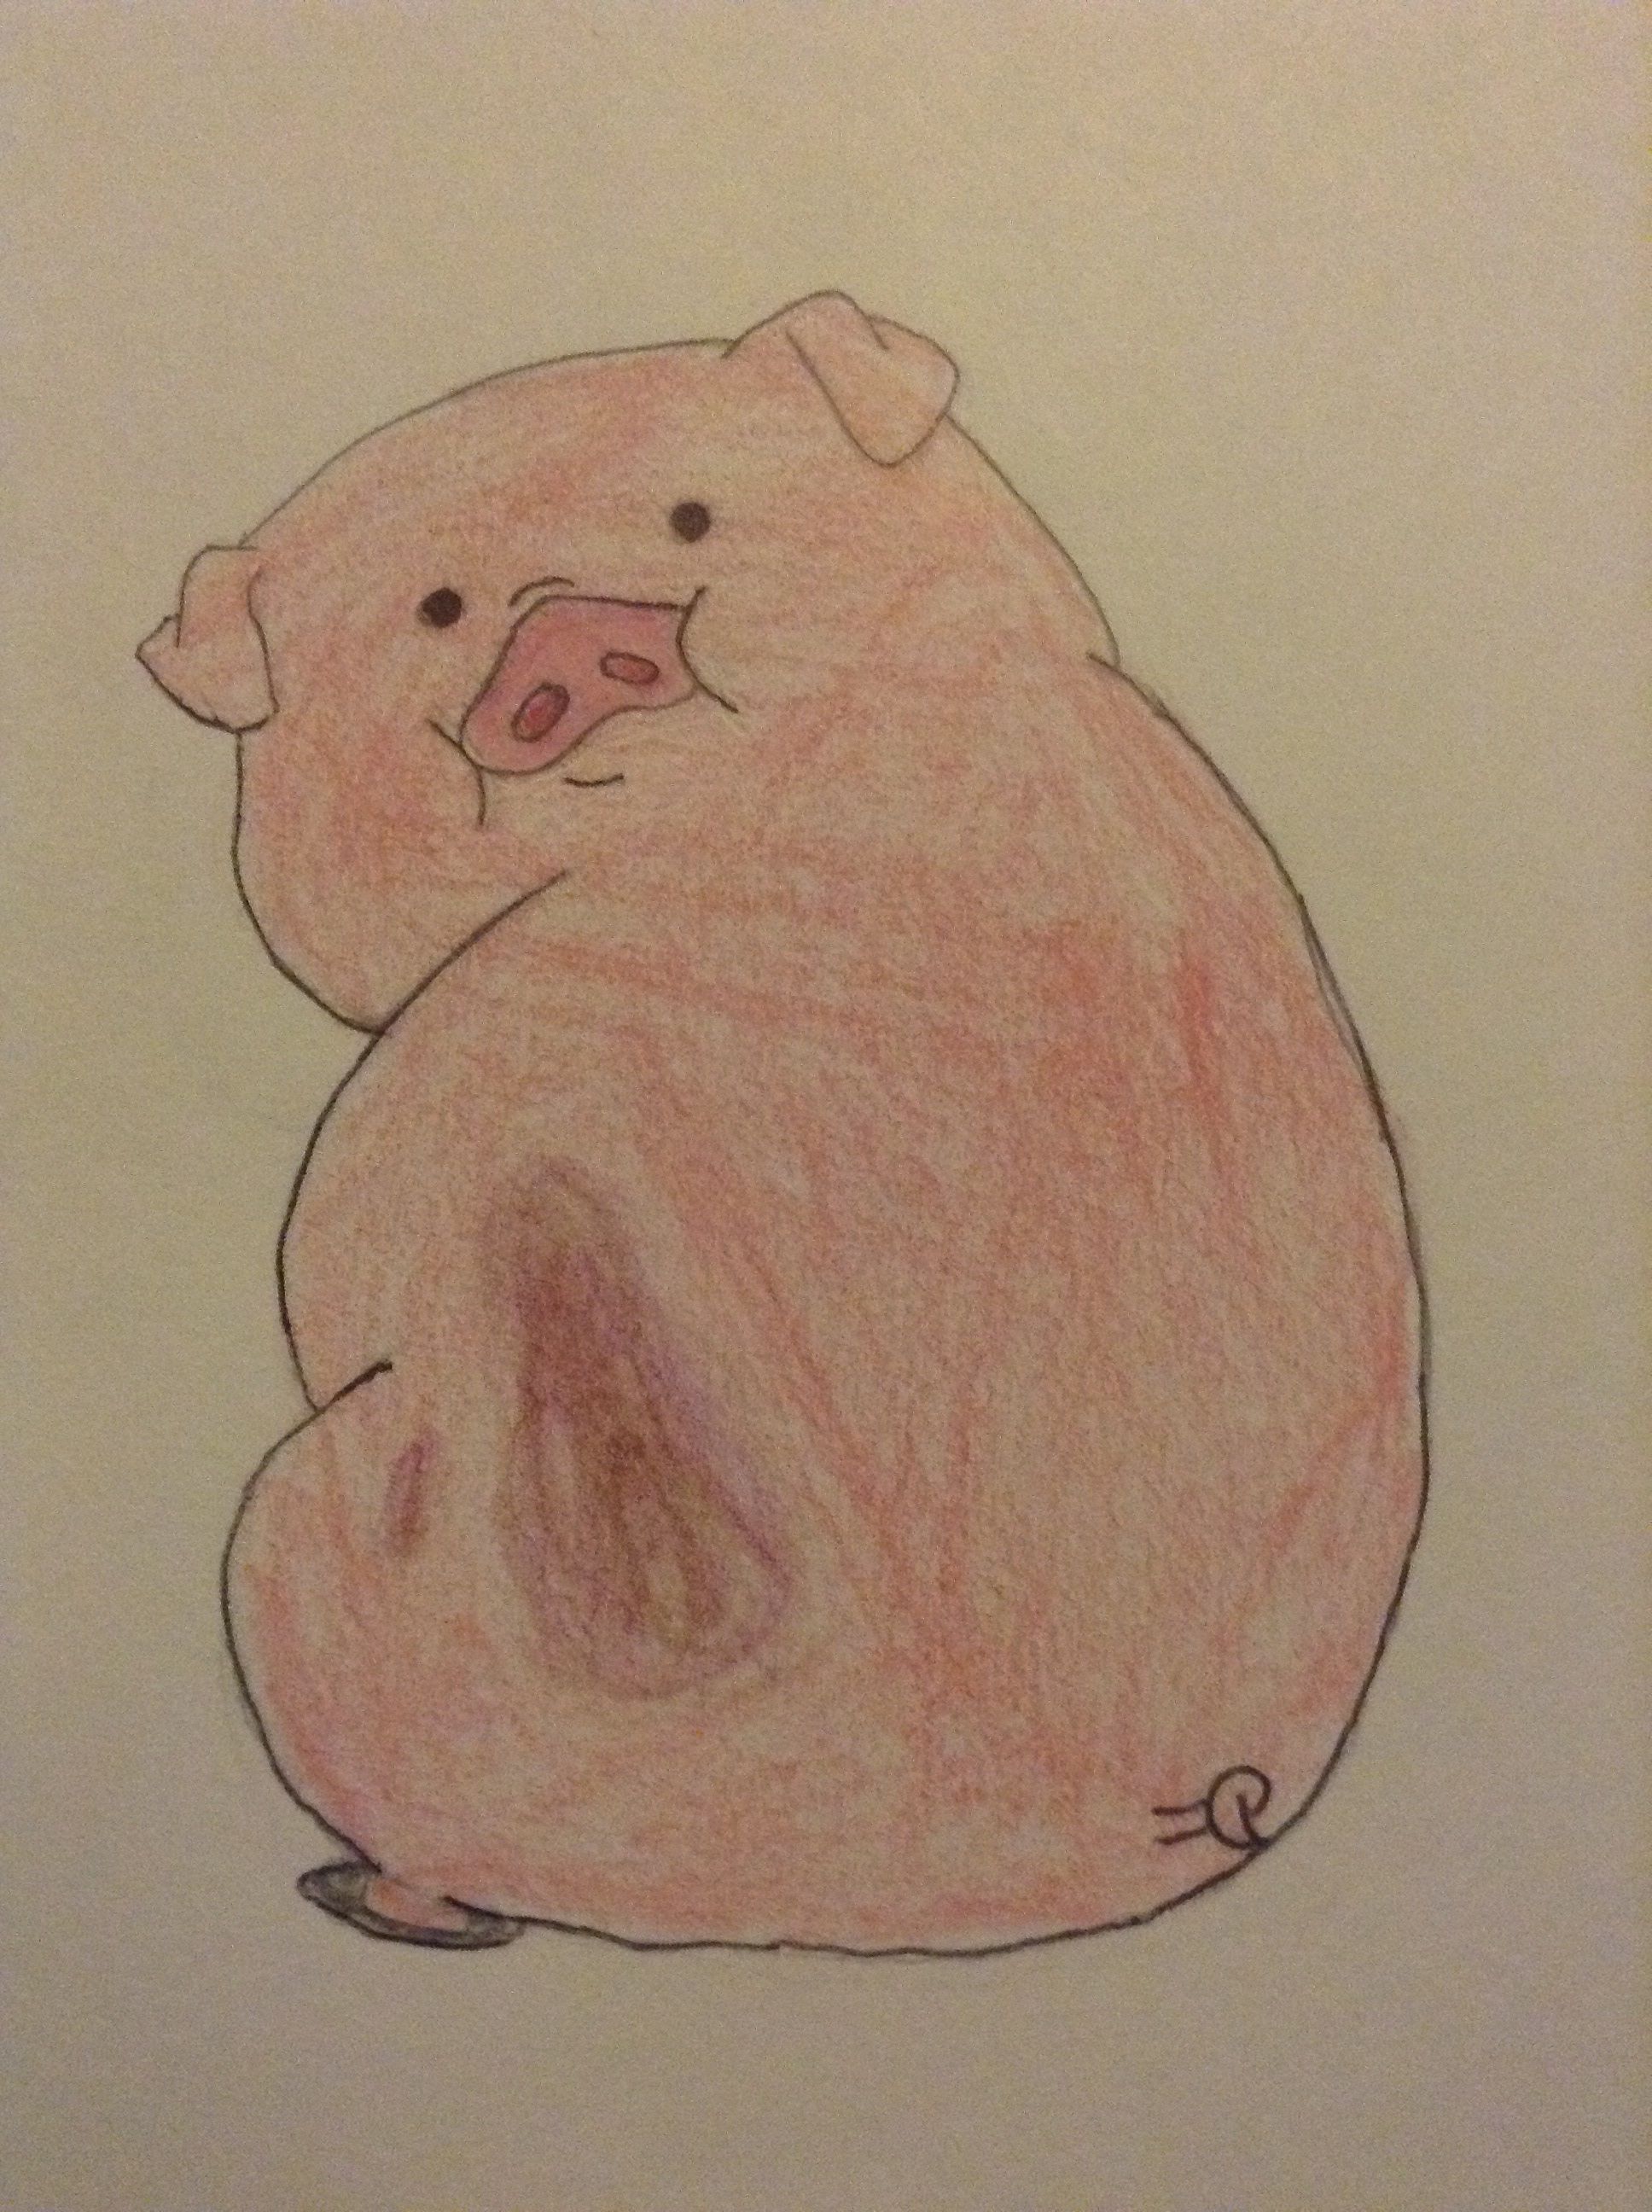 Waddles the pig from Gravity Falls